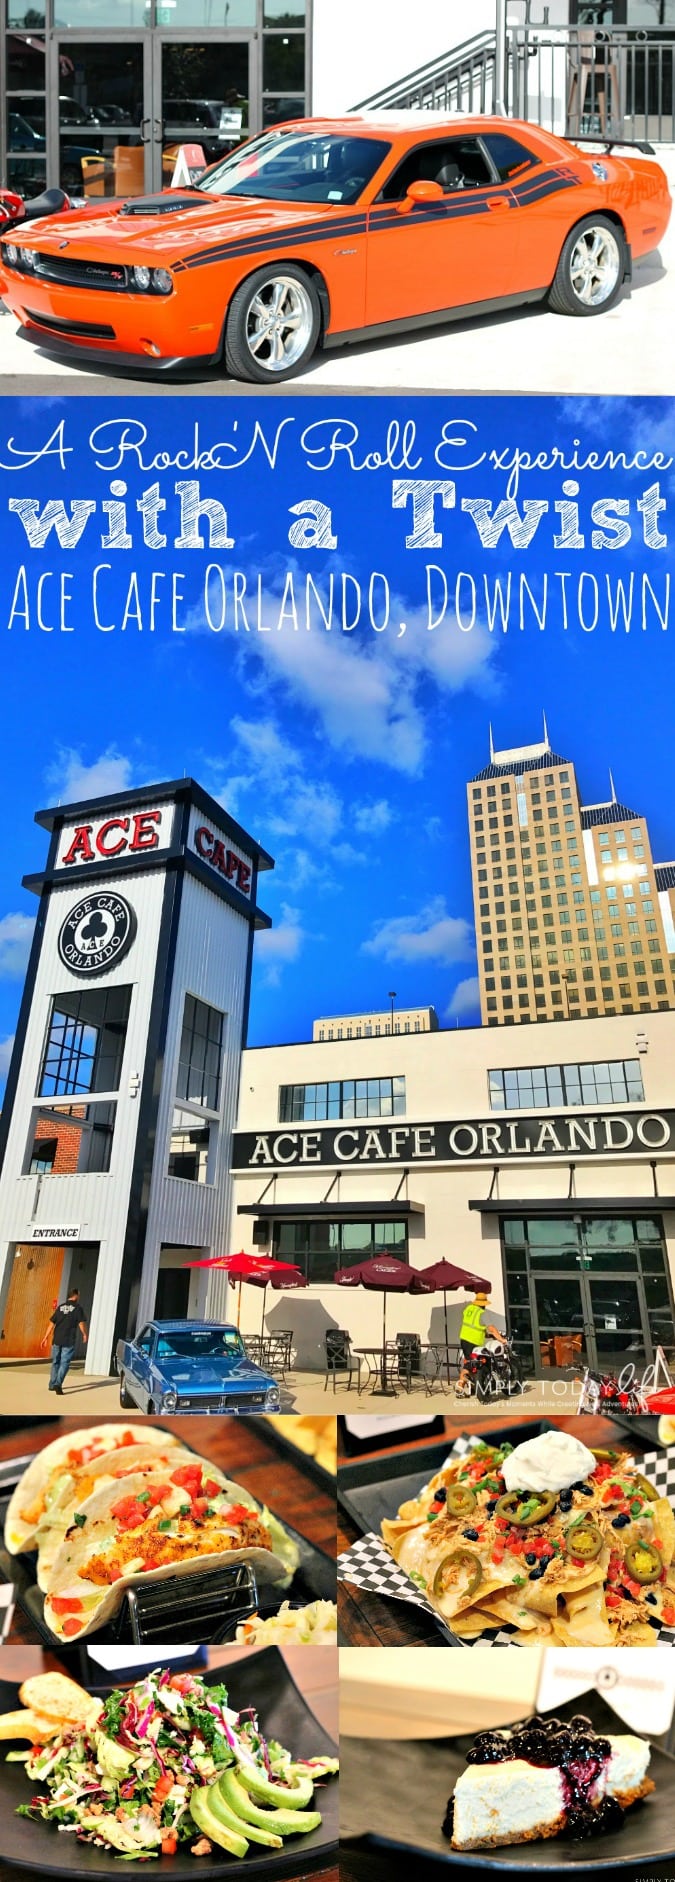 A Rock 'N Roll Experience with a Twist at Ace Cafe Orlando - simplytodaylife.com